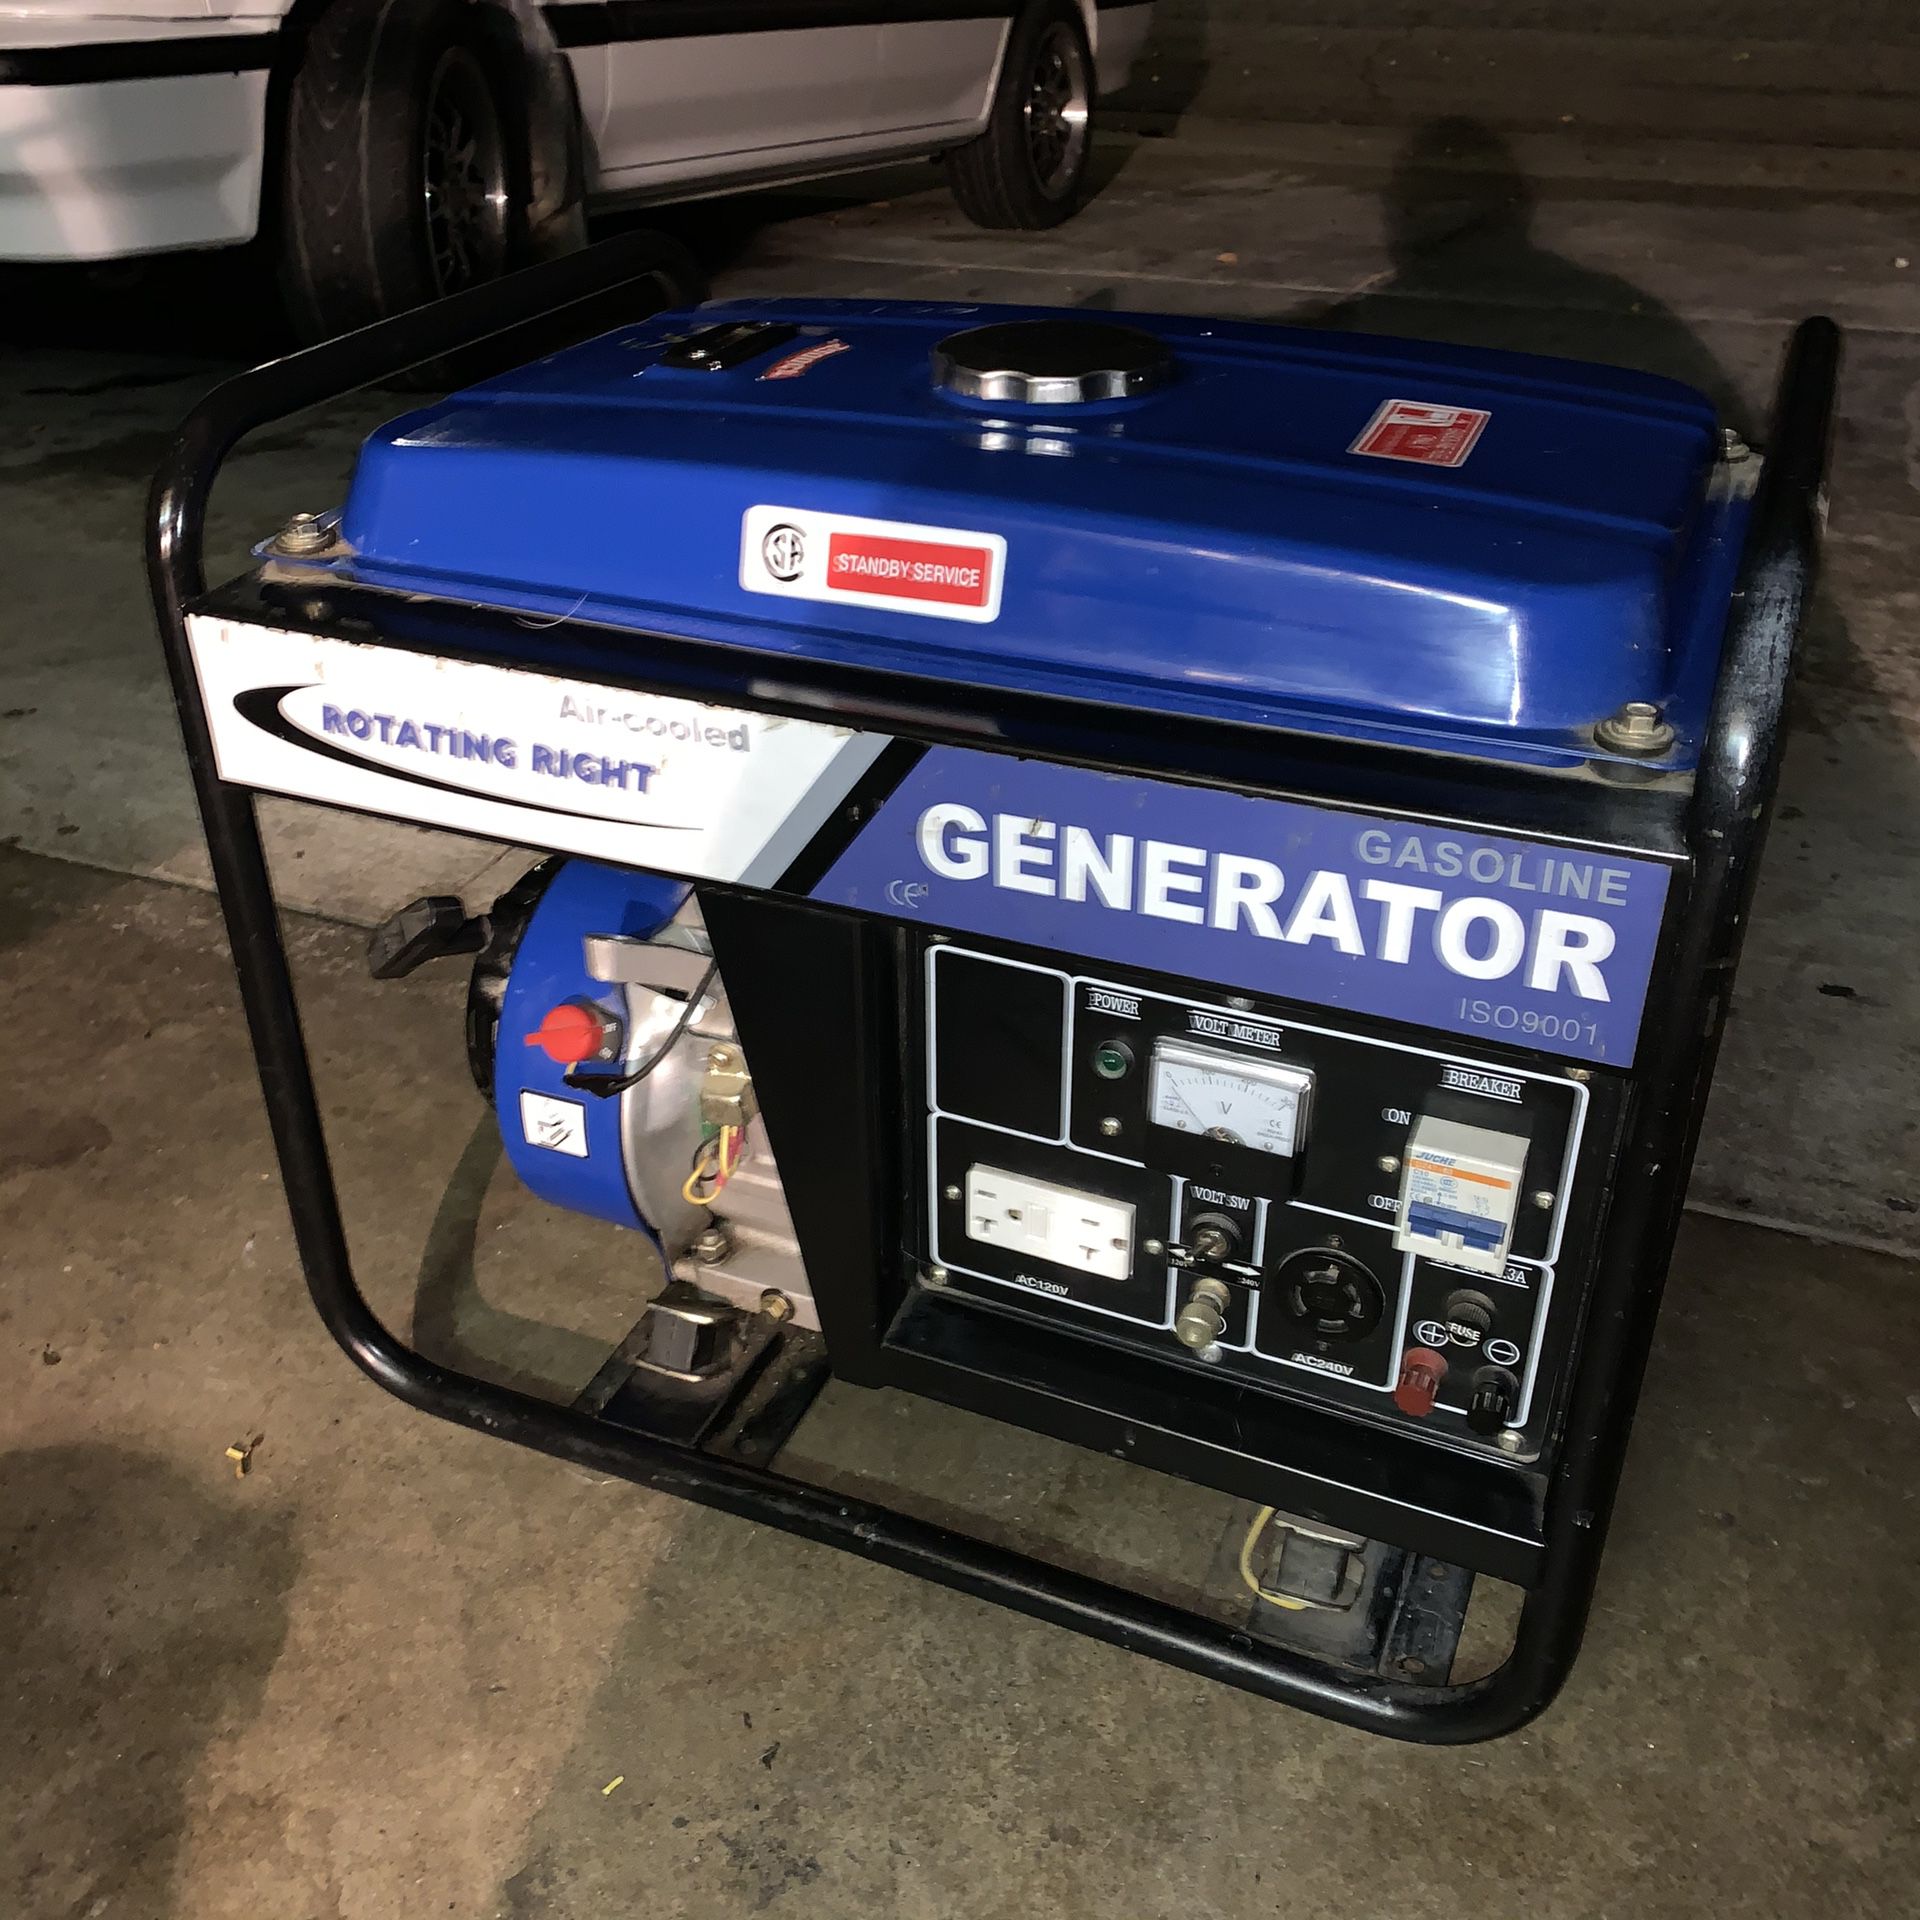 Good used portable generator. Good working conditions 2300 running watts. Two 120 v AC outlets one 240v AC and one 12 v DC.